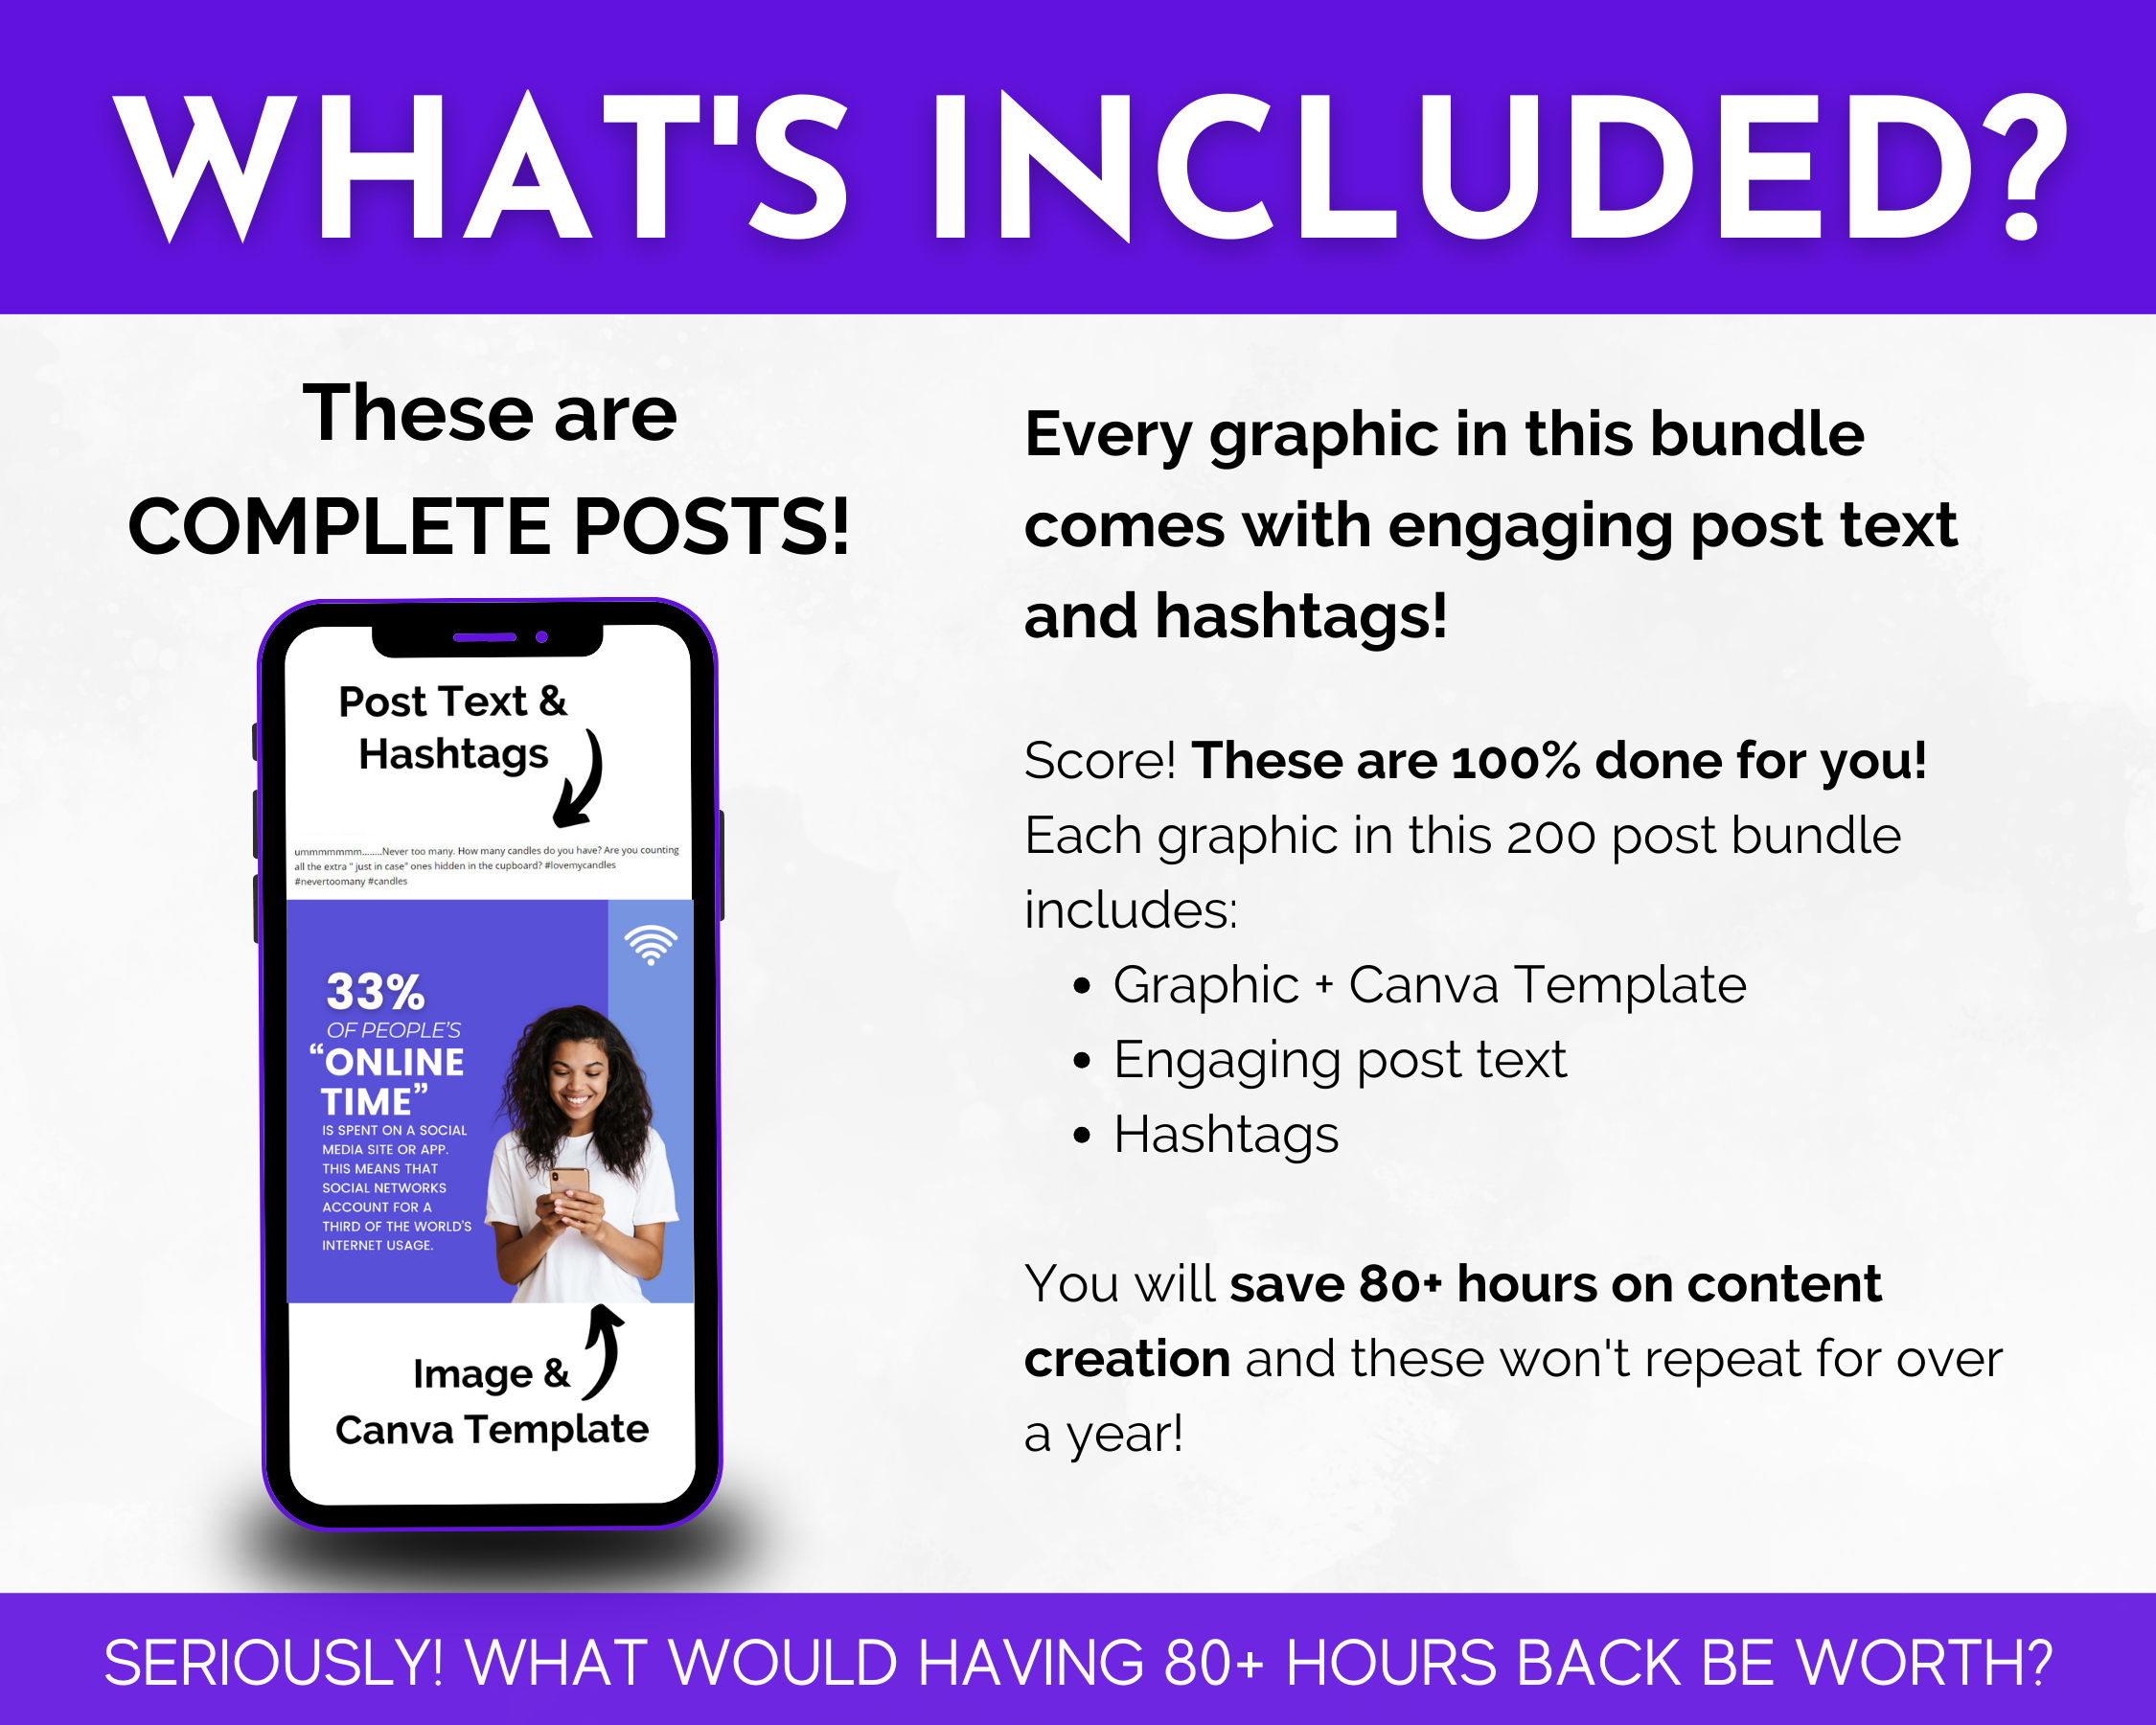 What's included in the complete graphic design package with Socially Inclined's Social Media Manager 200 Post Content Bundle with Canva Templates and Social Media Images?